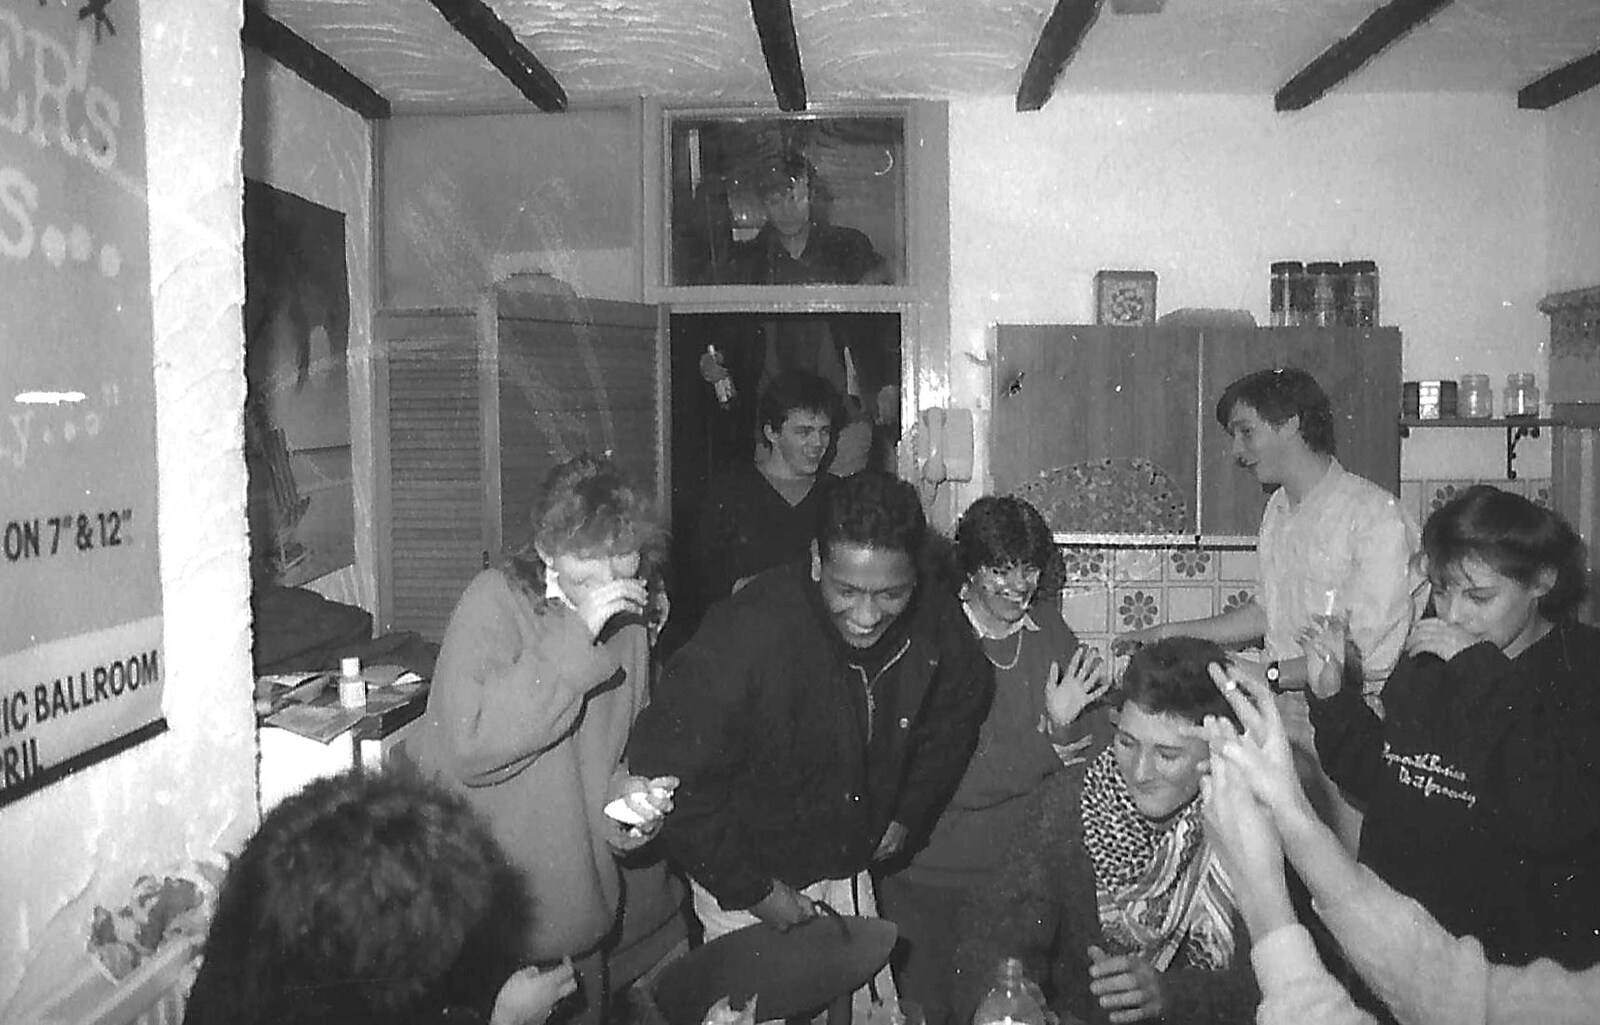 A load more BABS students pile into the kitchen from Uni: The Plymouth Polytechnic Satique Project, Salcombe and Plymouth - 10th May 1986